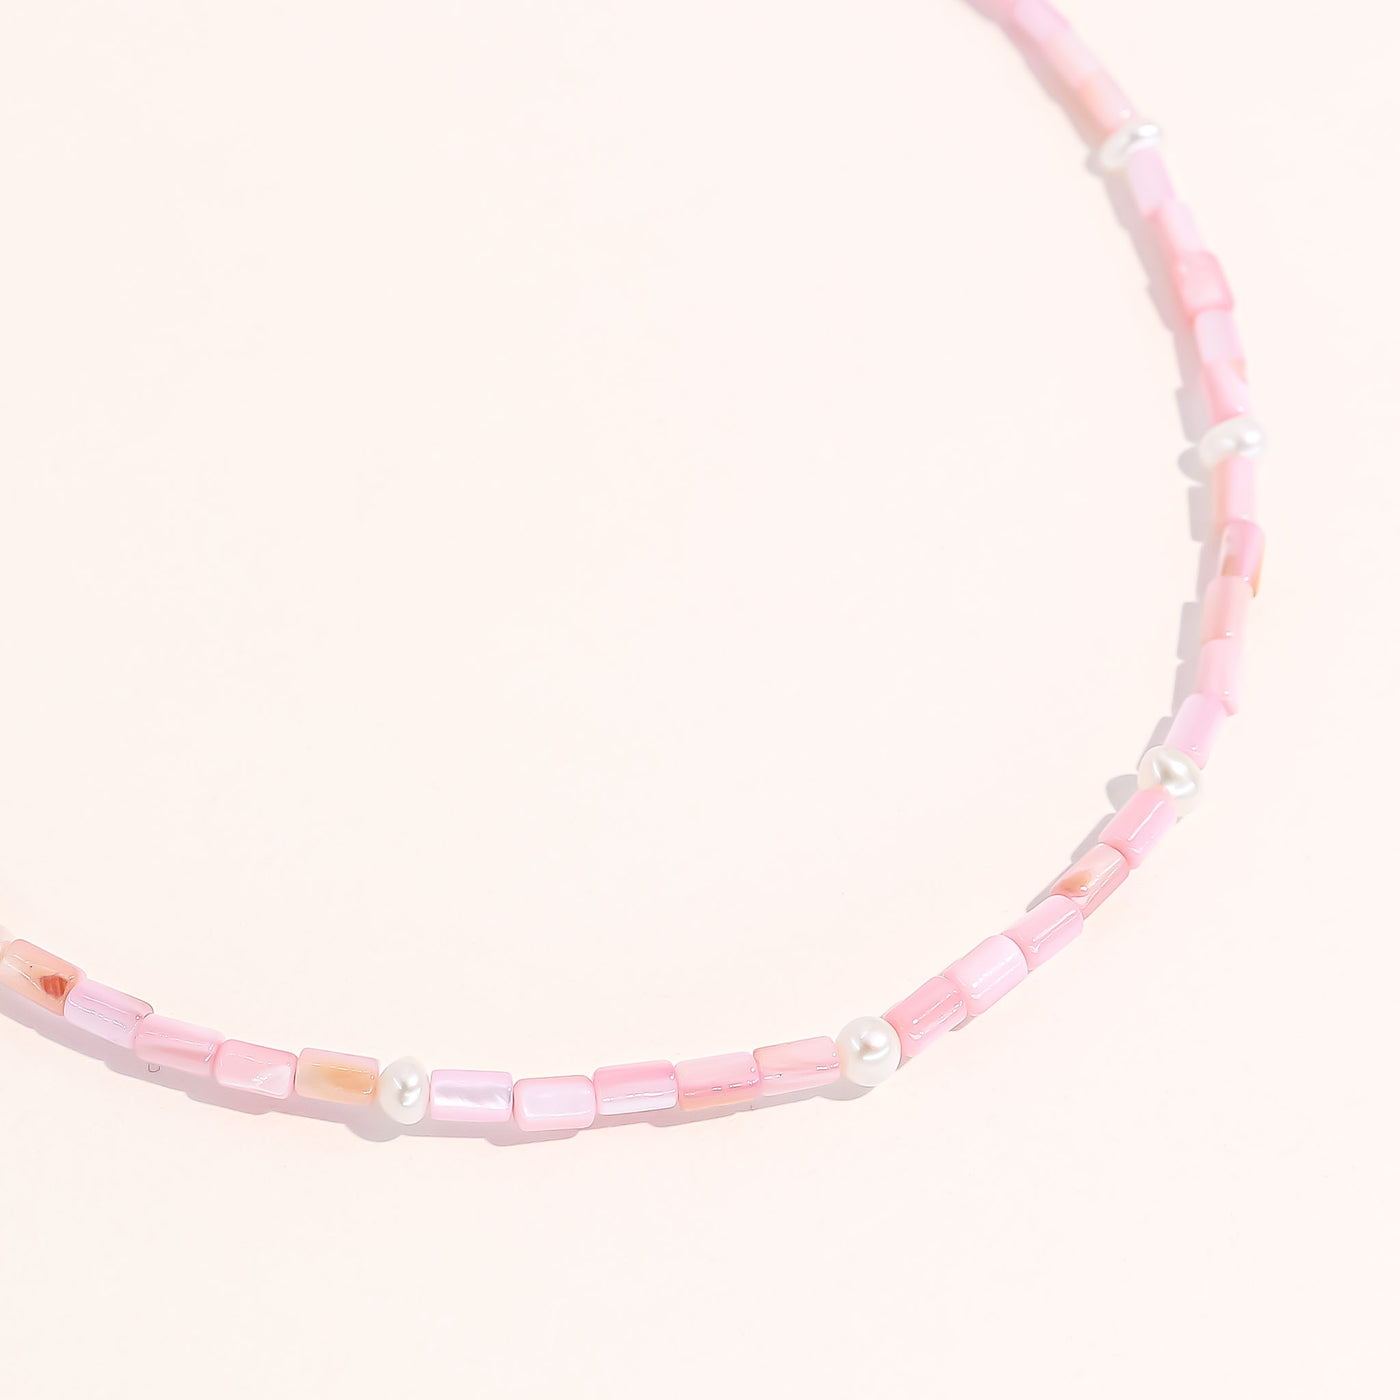 *Limited* Lusia Necklace - Light Pink - Joey Baby